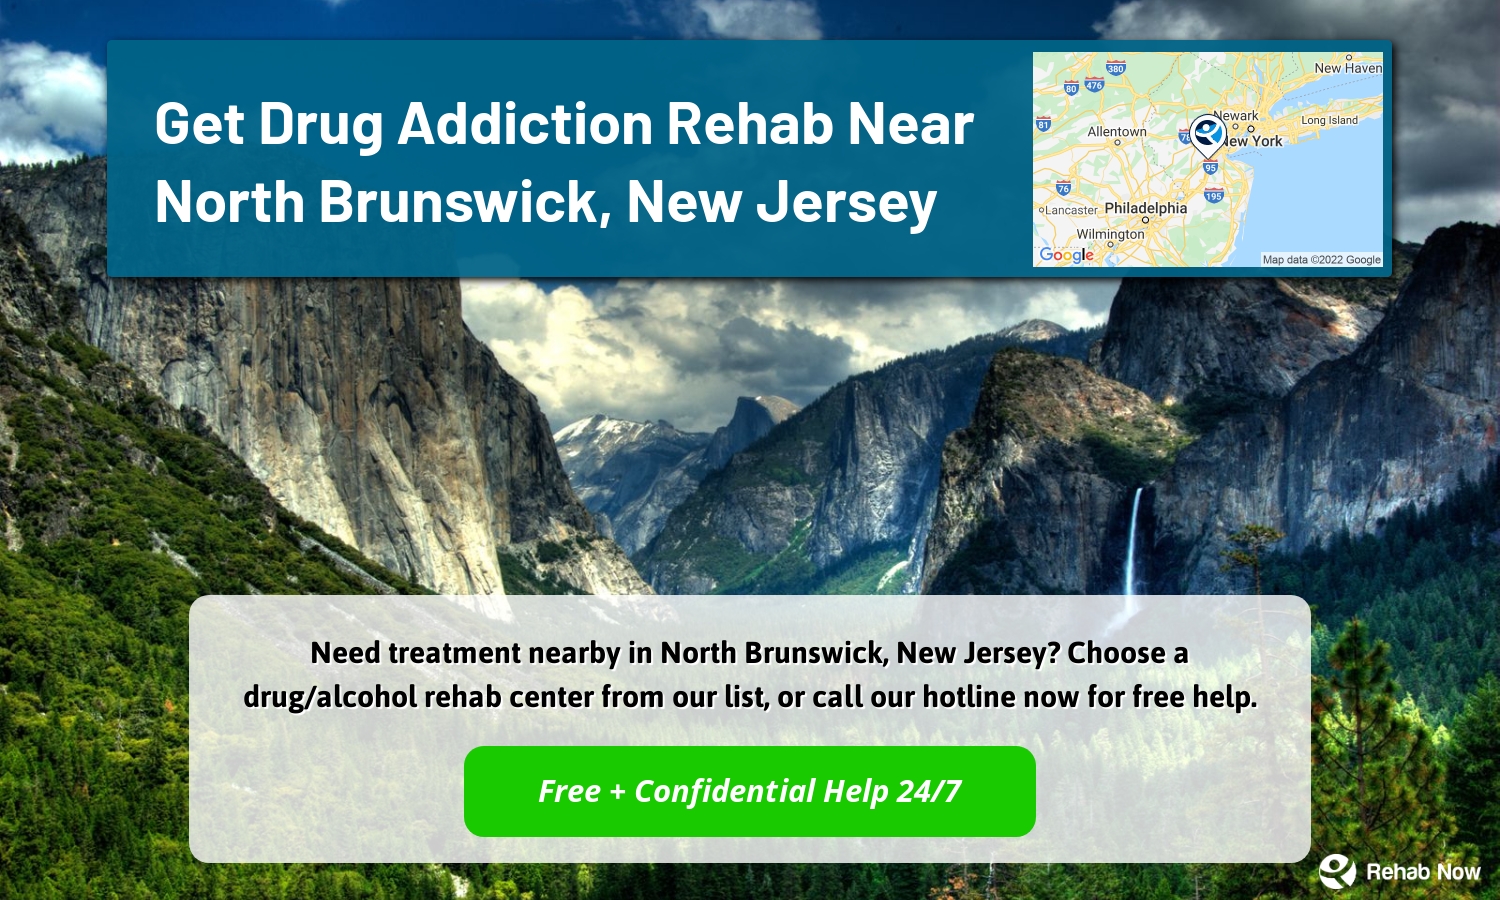 Need treatment nearby in North Brunswick, New Jersey? Choose a drug/alcohol rehab center from our list, or call our hotline now for free help.